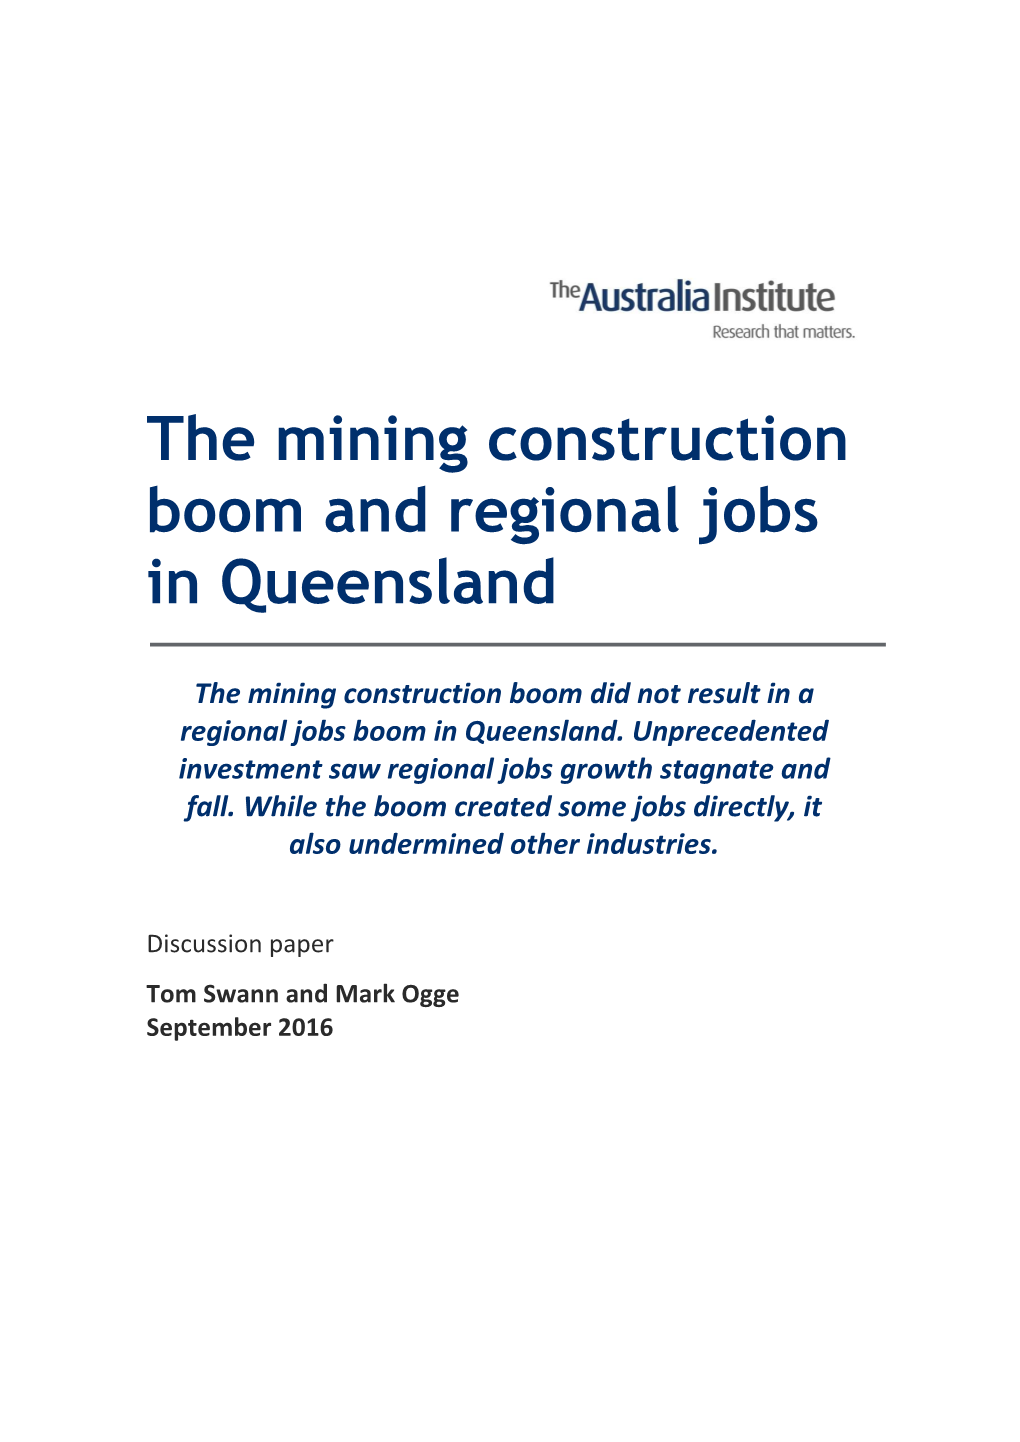 The Mining Construction Boom and Regional Jobs in Queensland